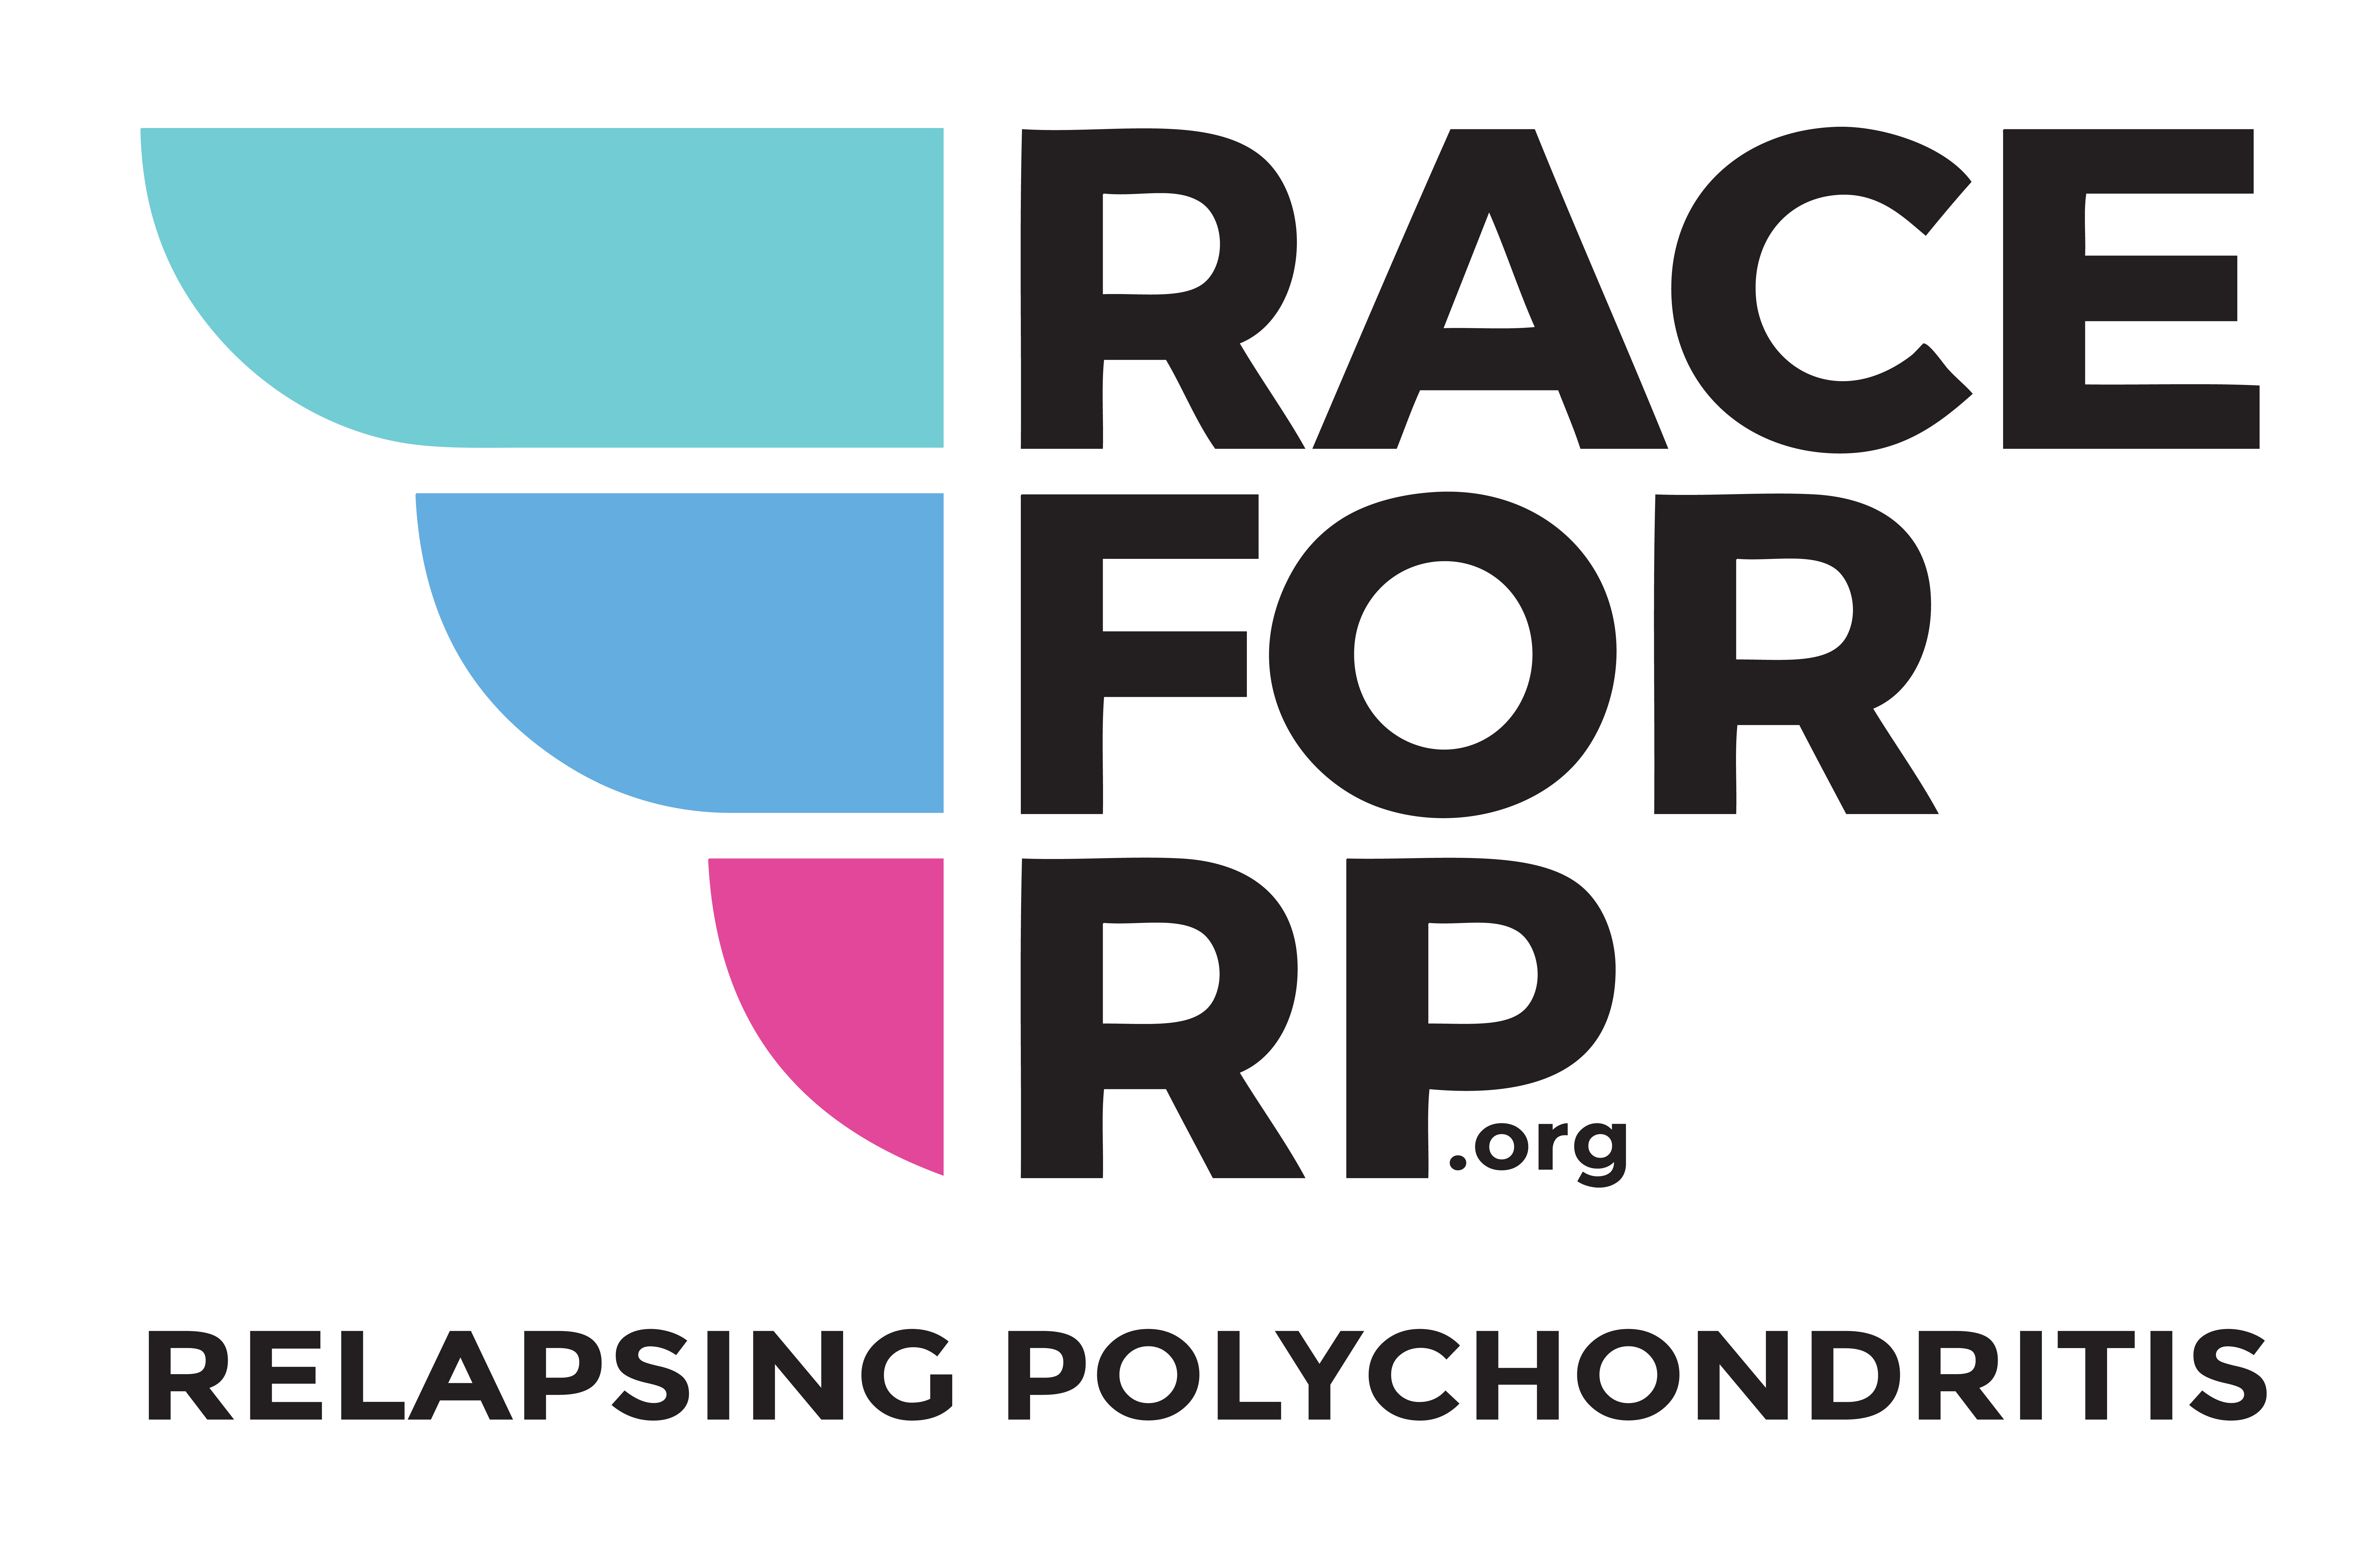 Race for RPorg.png